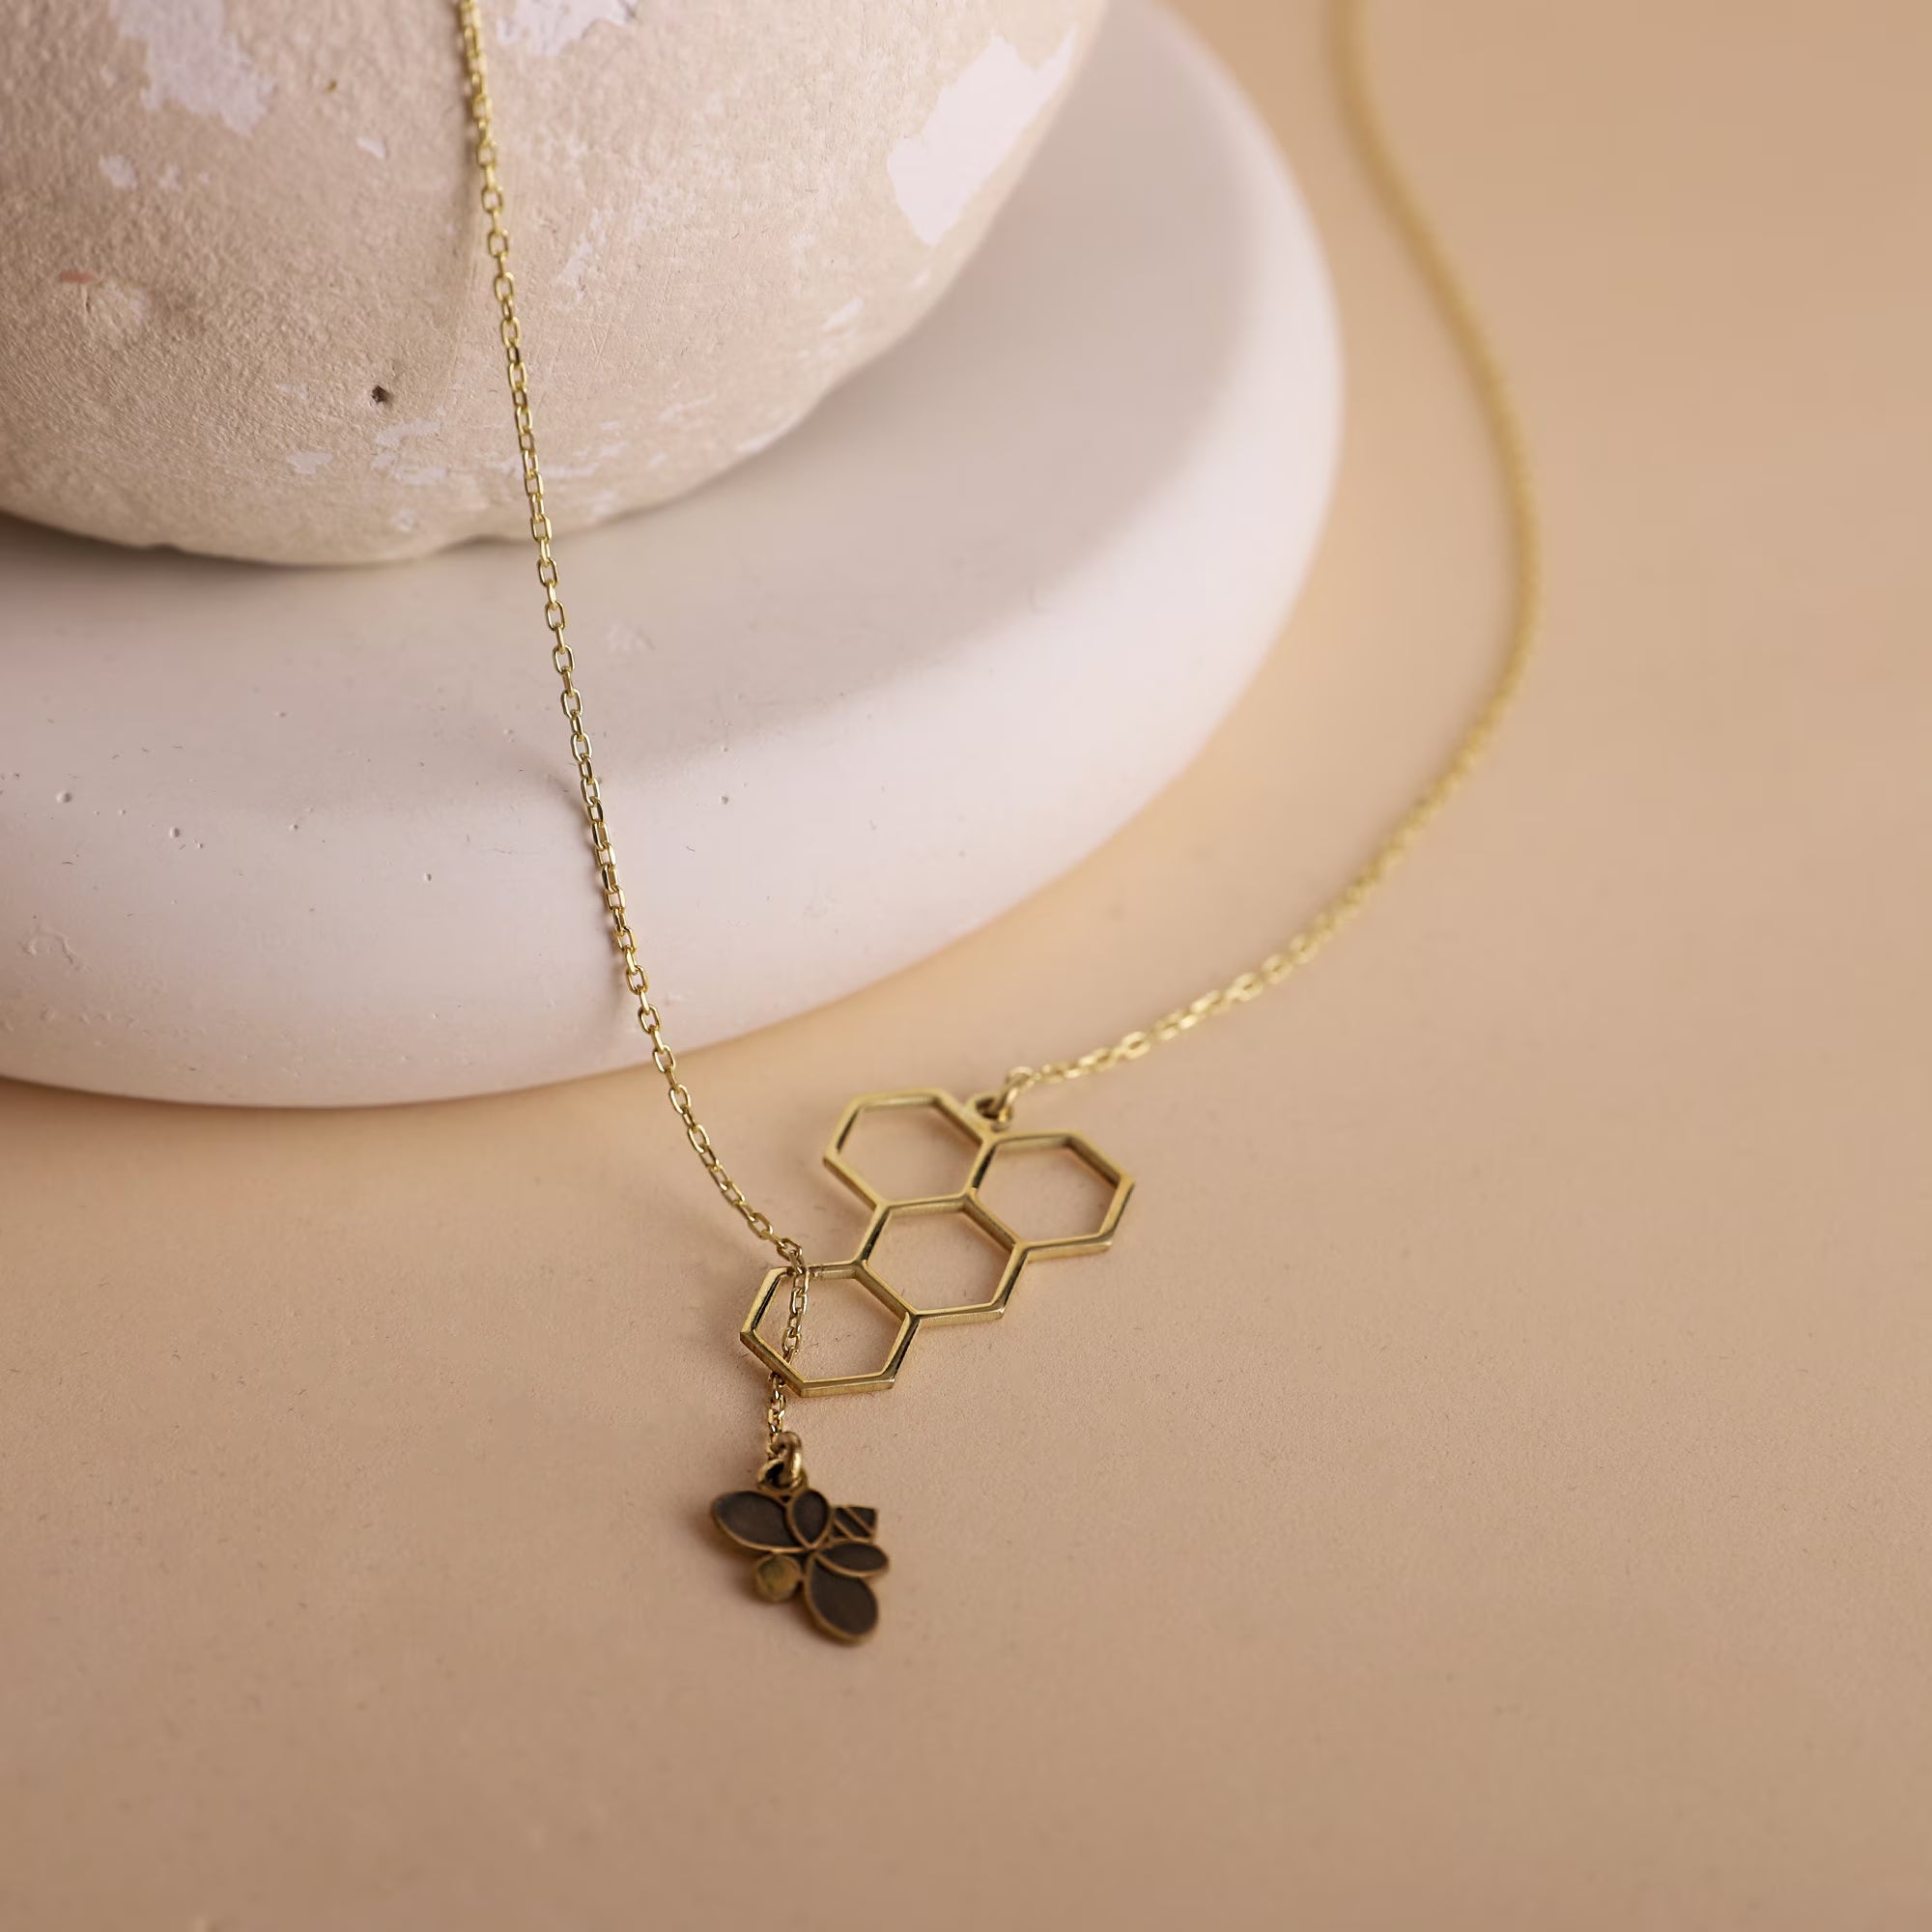 Honeycomb with Bumblebee Dainty Necklace | Minimalist Gold Honeycomb Necklace | Silver Bee Necklace | Gift for Women